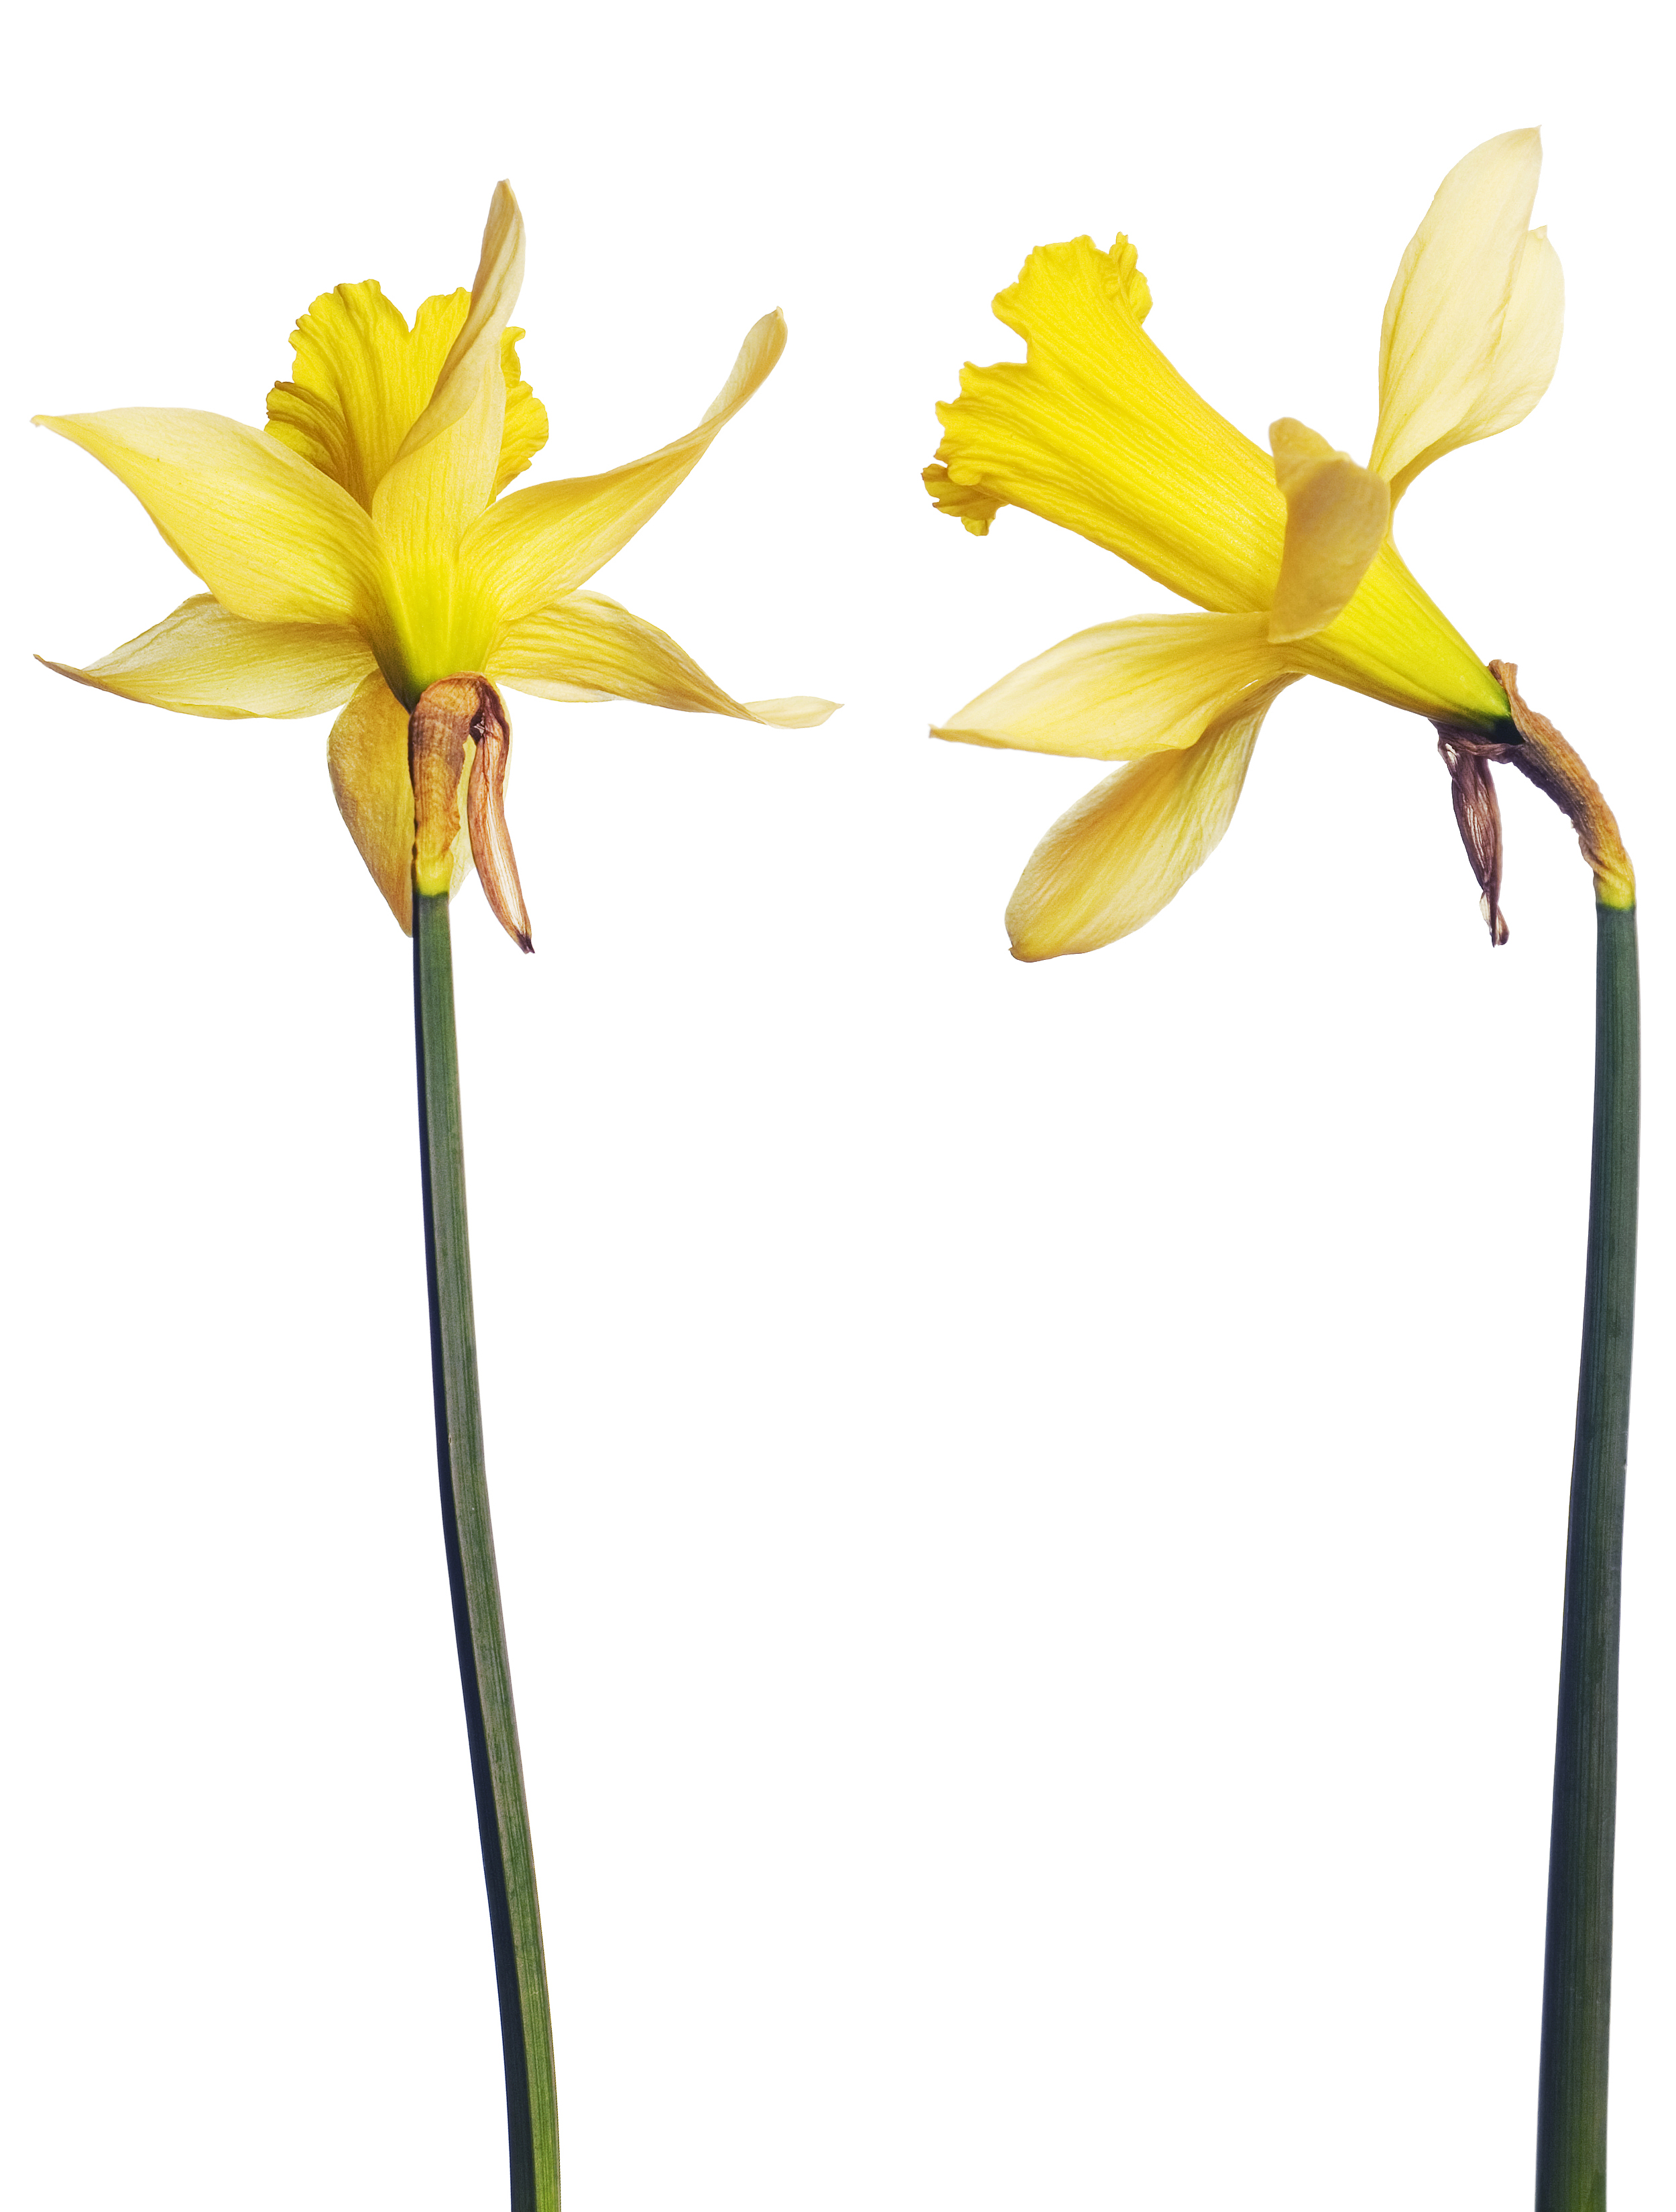 Narcissus, Aroma, Potted, Natural, Nature, HQ Photo